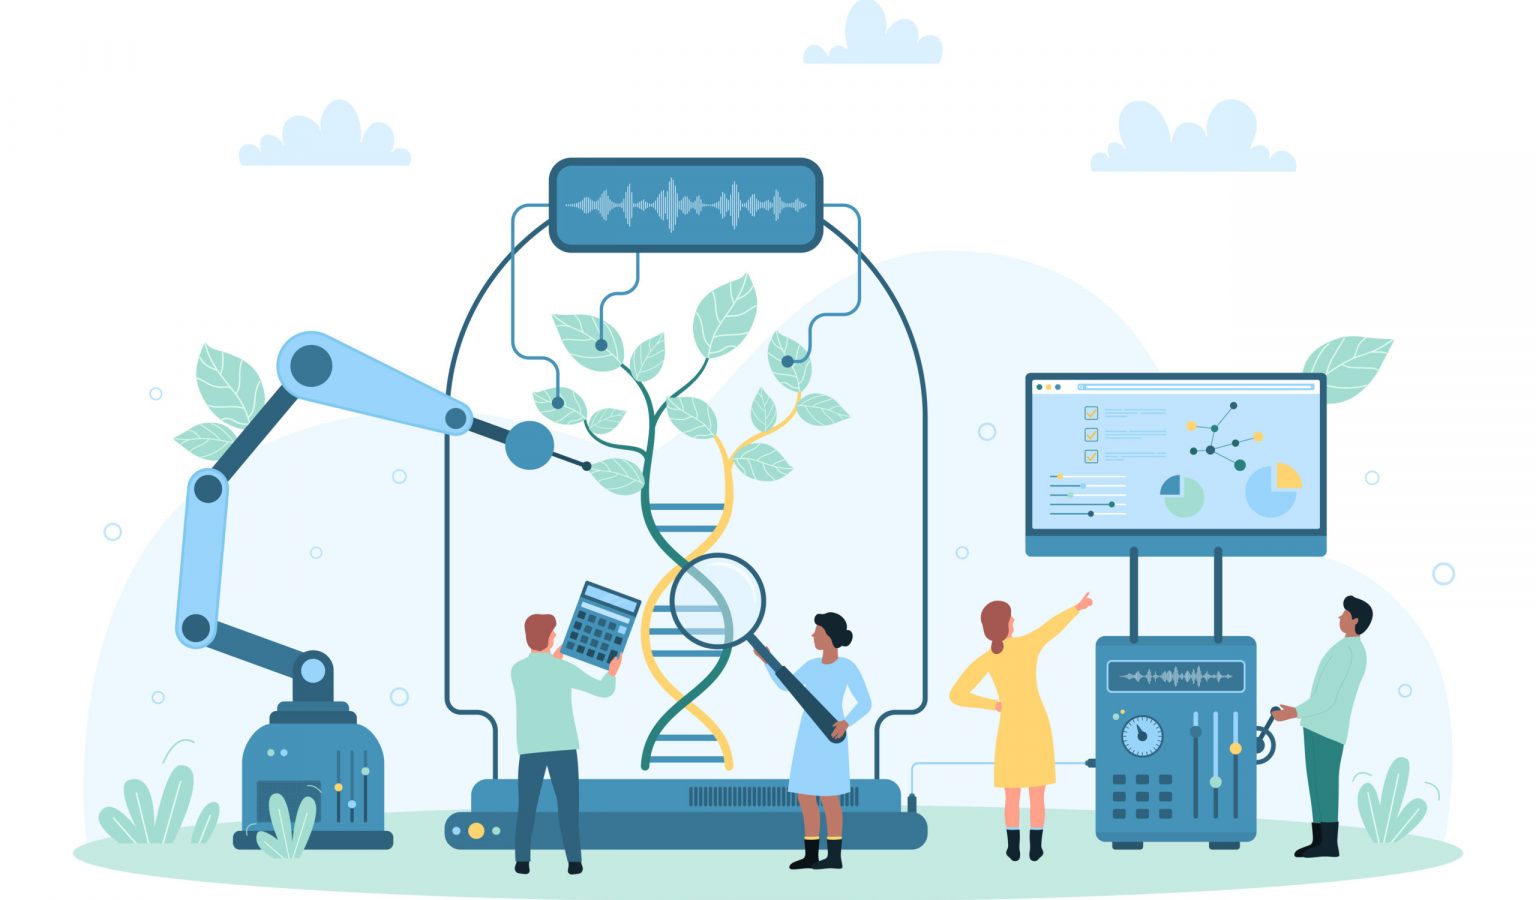 Biotechnology, futuristic science research vector illustration. Cartoon tiny people engineering green plant from helix of DNA, using robots and scientific laboratory equipment for lab biotech tests